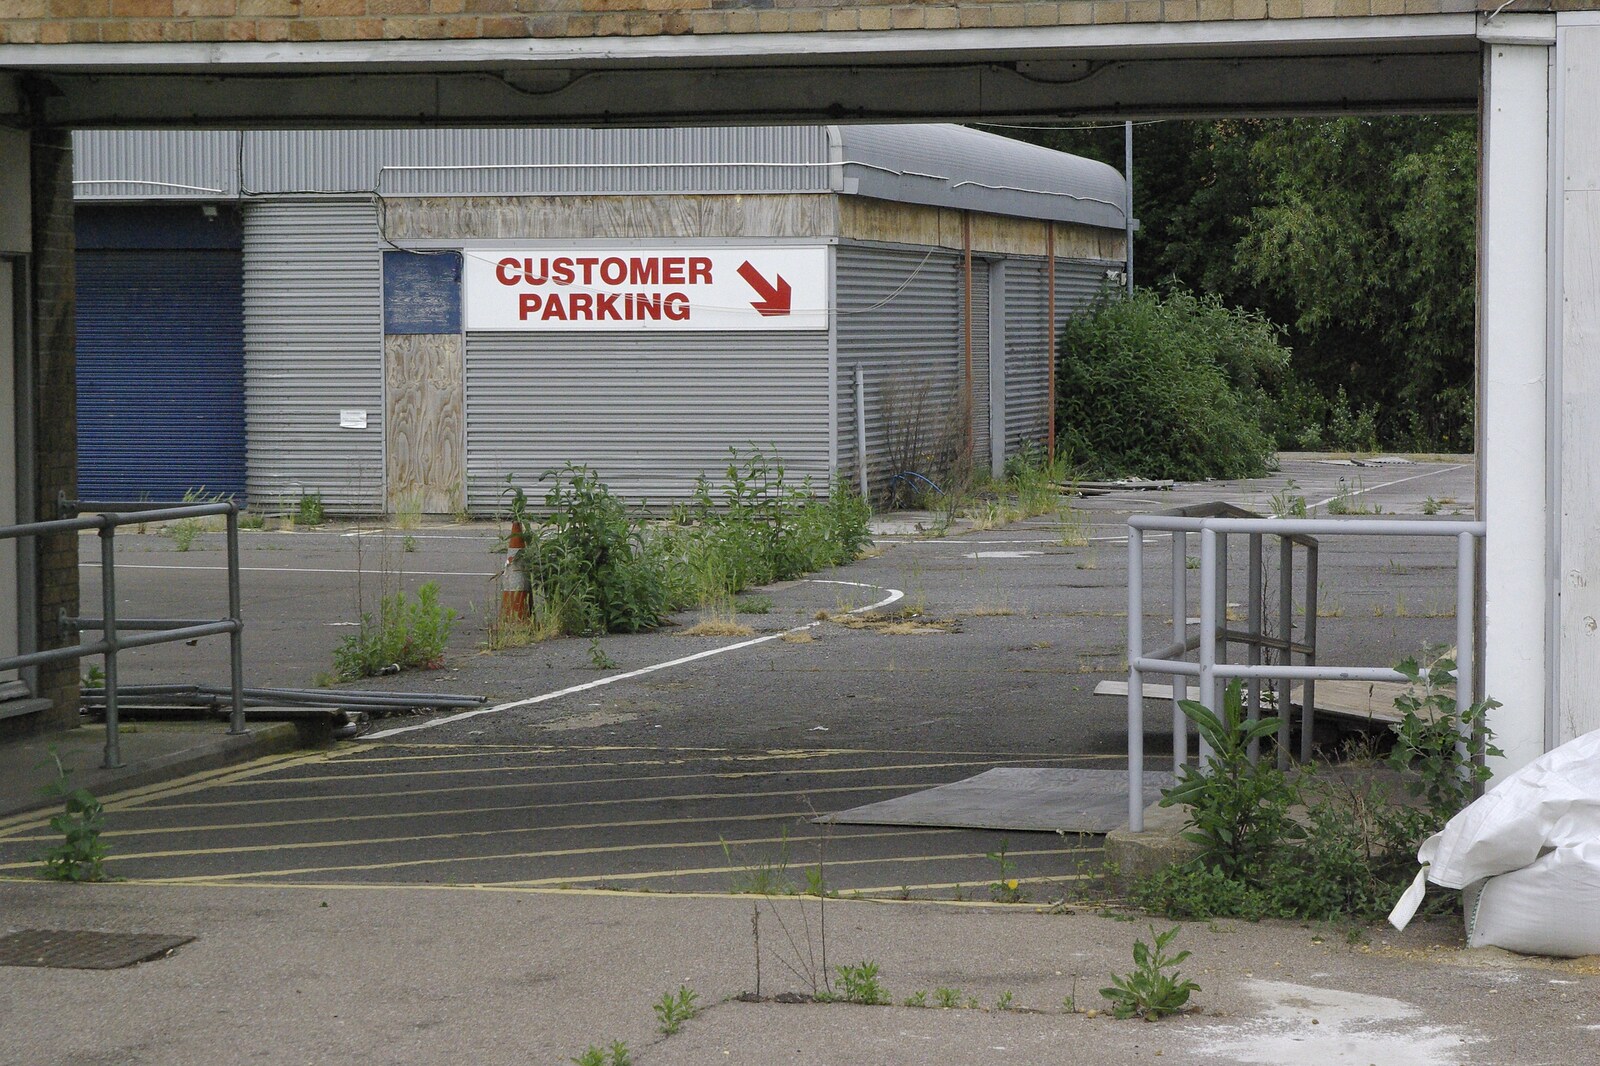 Customer Parking at the derelict site from Cambridge and Hoxne Beer Festivals, and Mill Road Dereliction - 26th May 2008